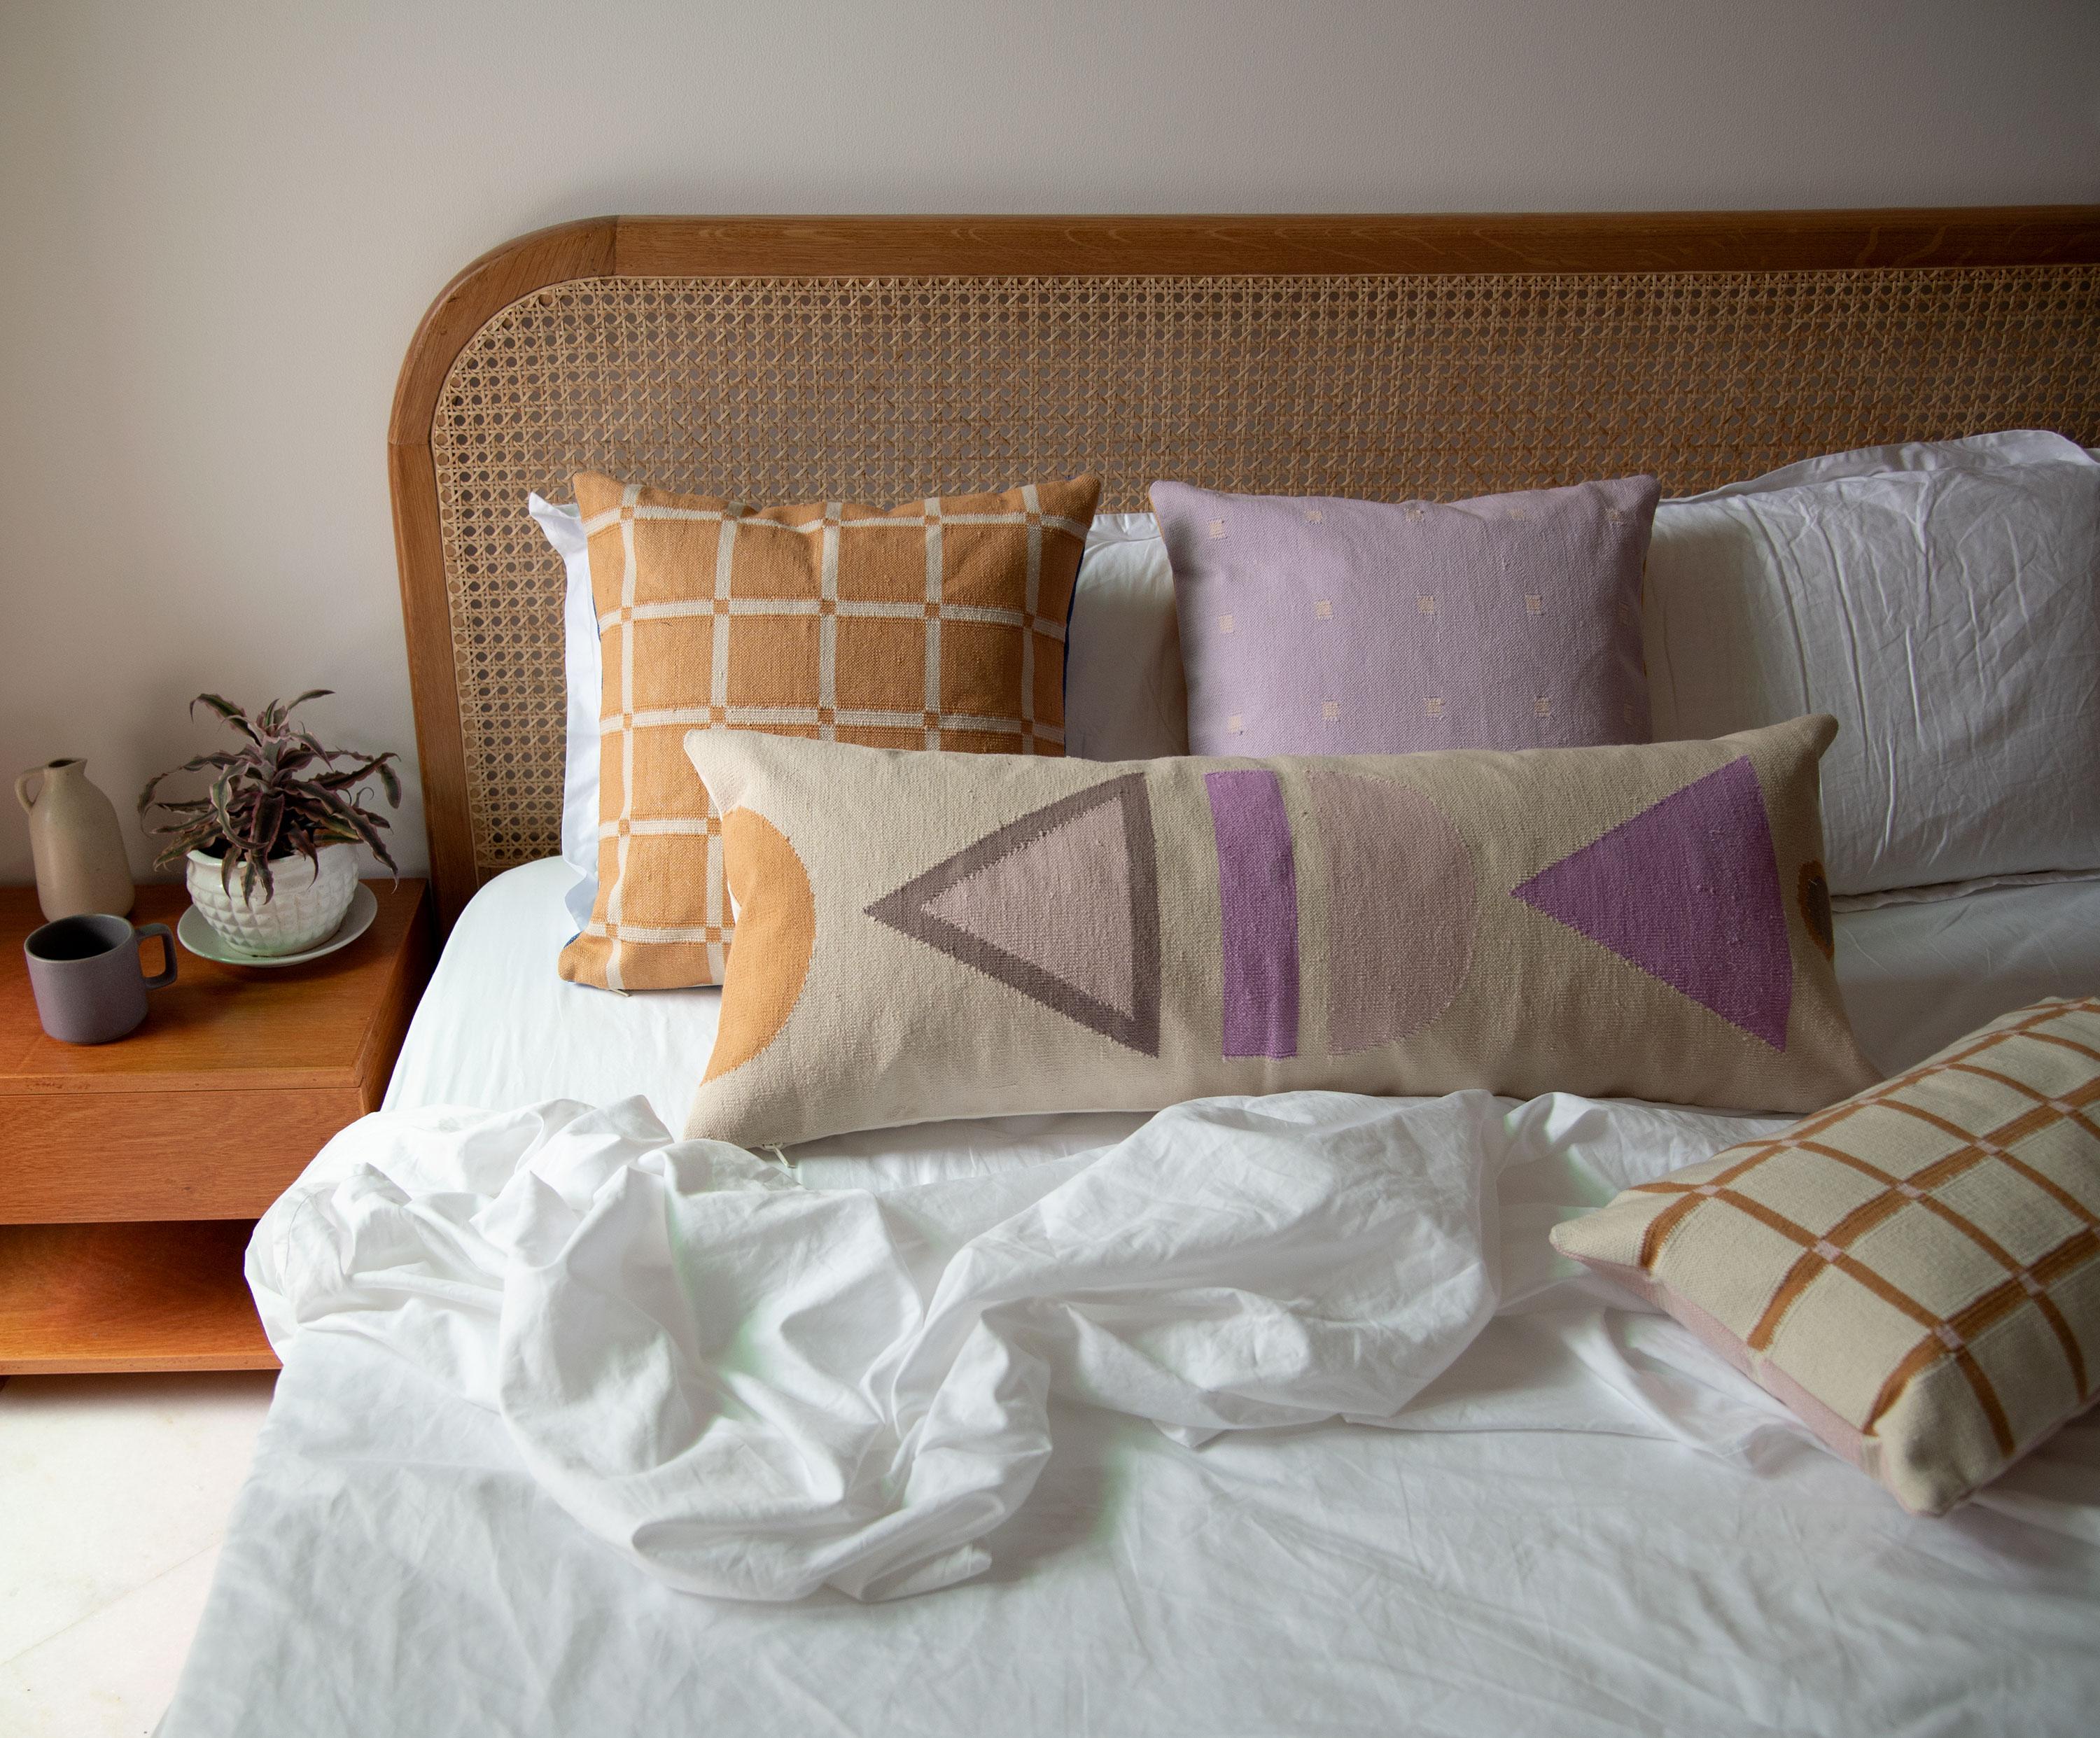 Hand-Woven Geometric Grid Pillow, Reversible Marmalade + Lilac